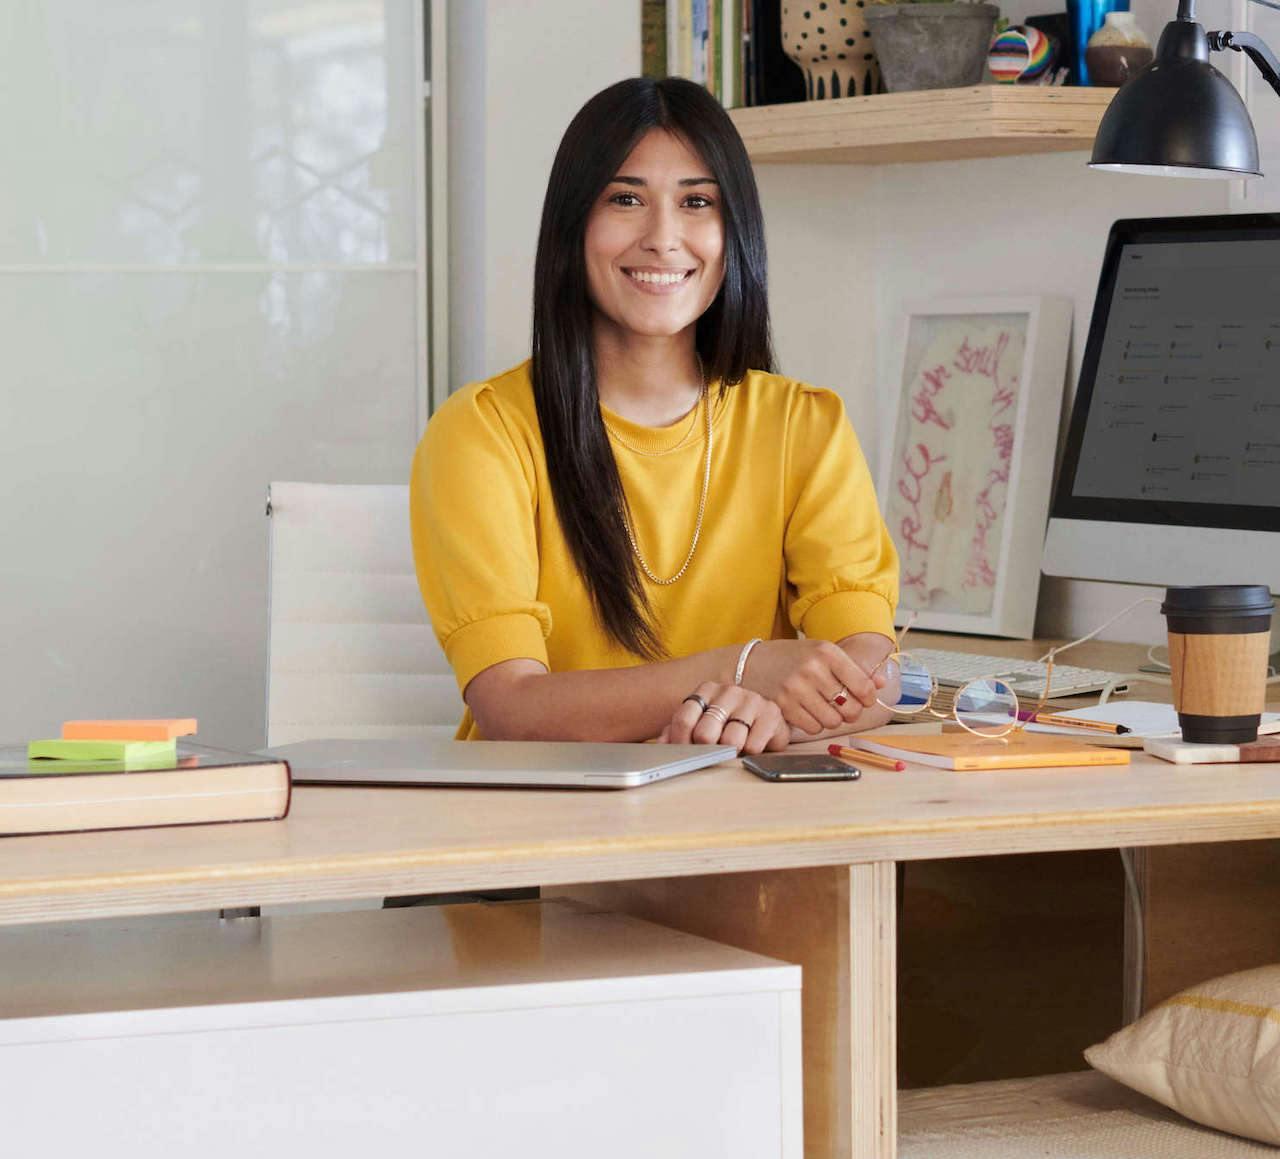 Smiling personal assistant sits at her desk